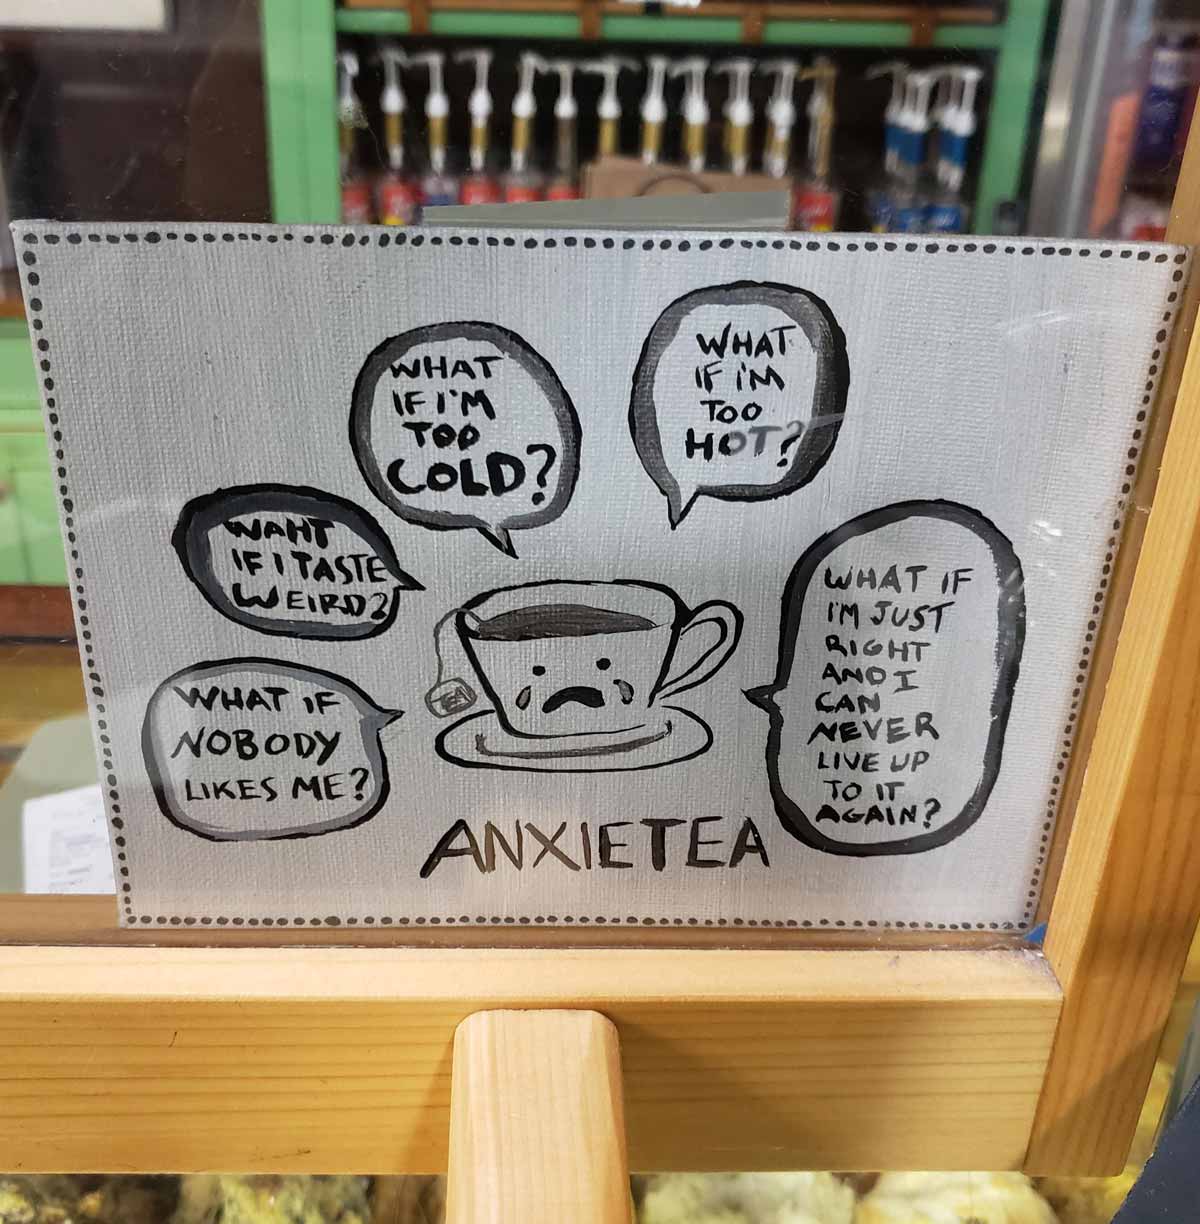 Sign I found at a coffee shop